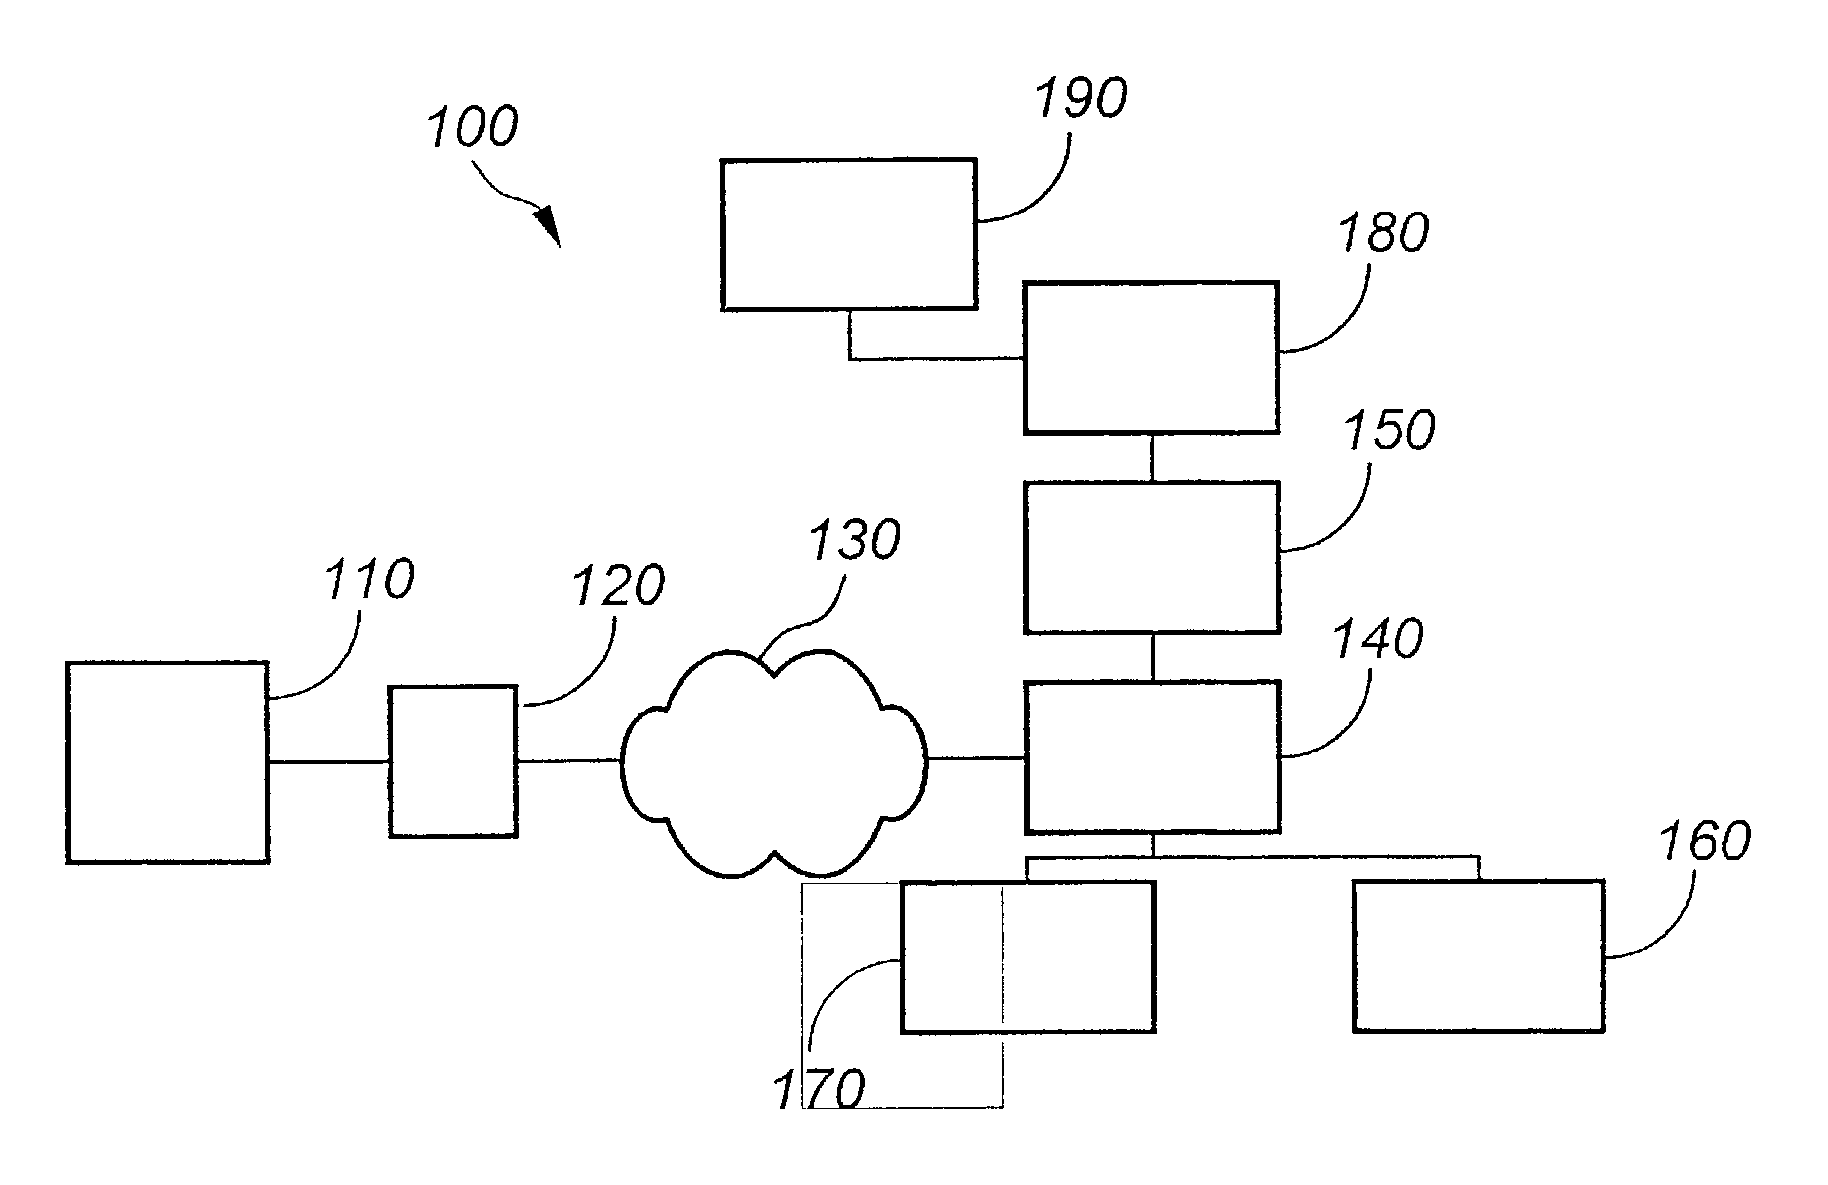 System for and methods of administration of access control to numerous resources and objects